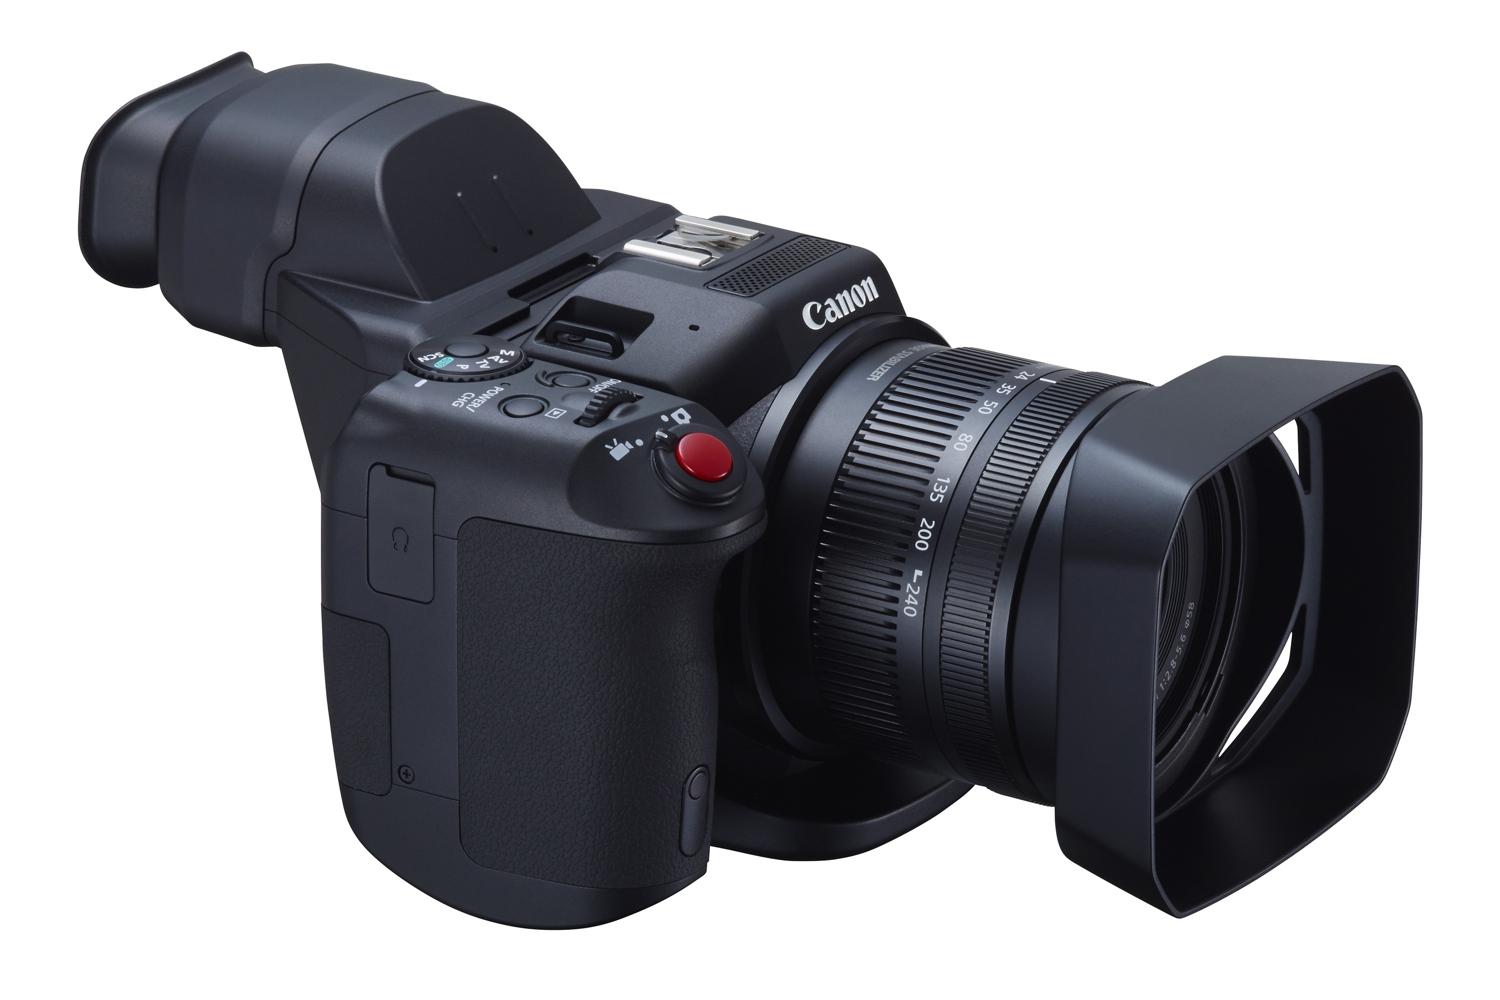 canons new affordable 4k camcorder ideal for budding filmmakers youtube creators canon xc10 5